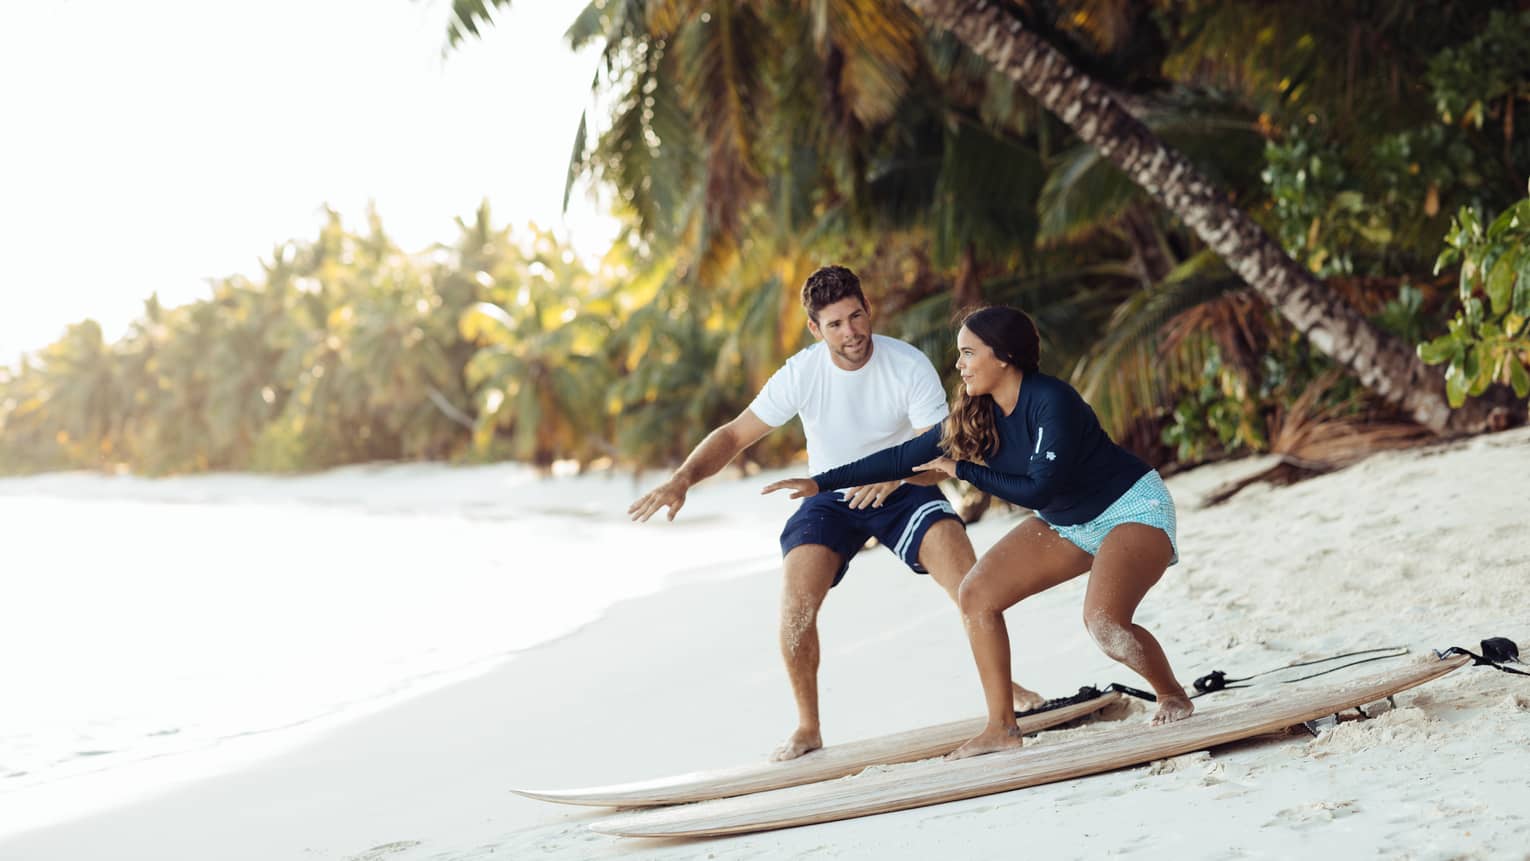 Man shows woman a surfing pose as they balance on surfboards on white sand beach under palm tree